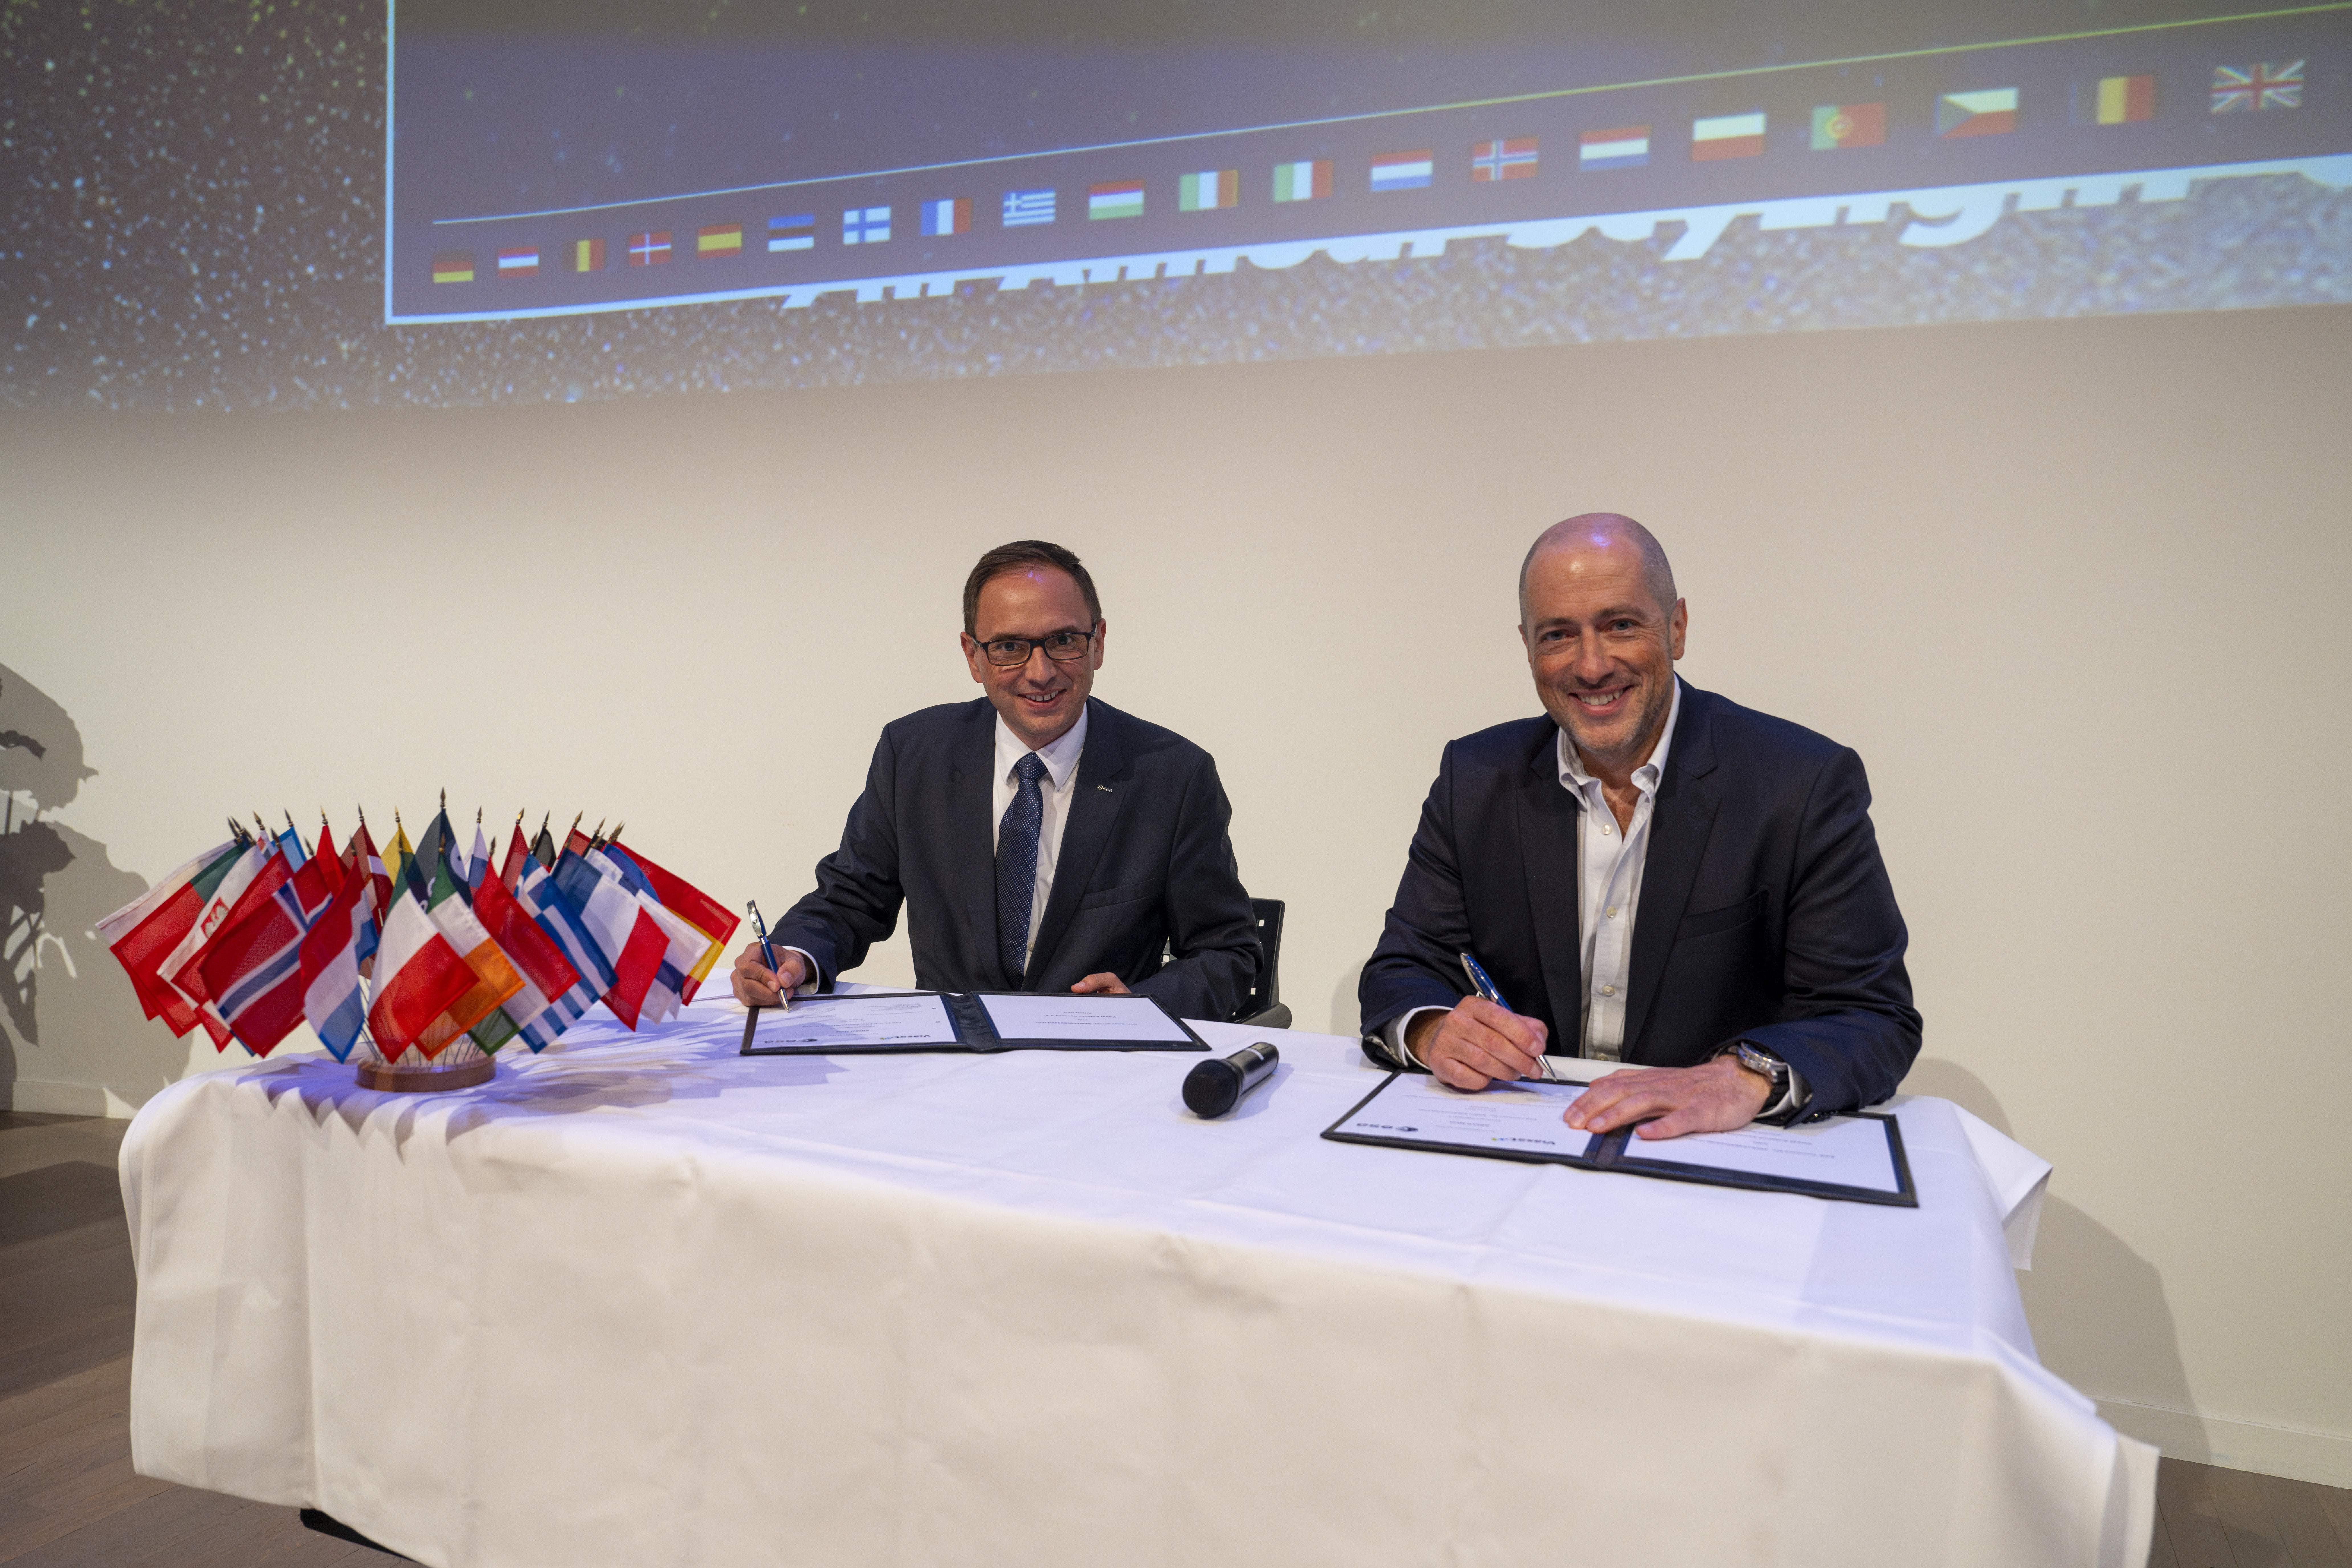 Signature between ESA and Viasat takes place in Eindhoven